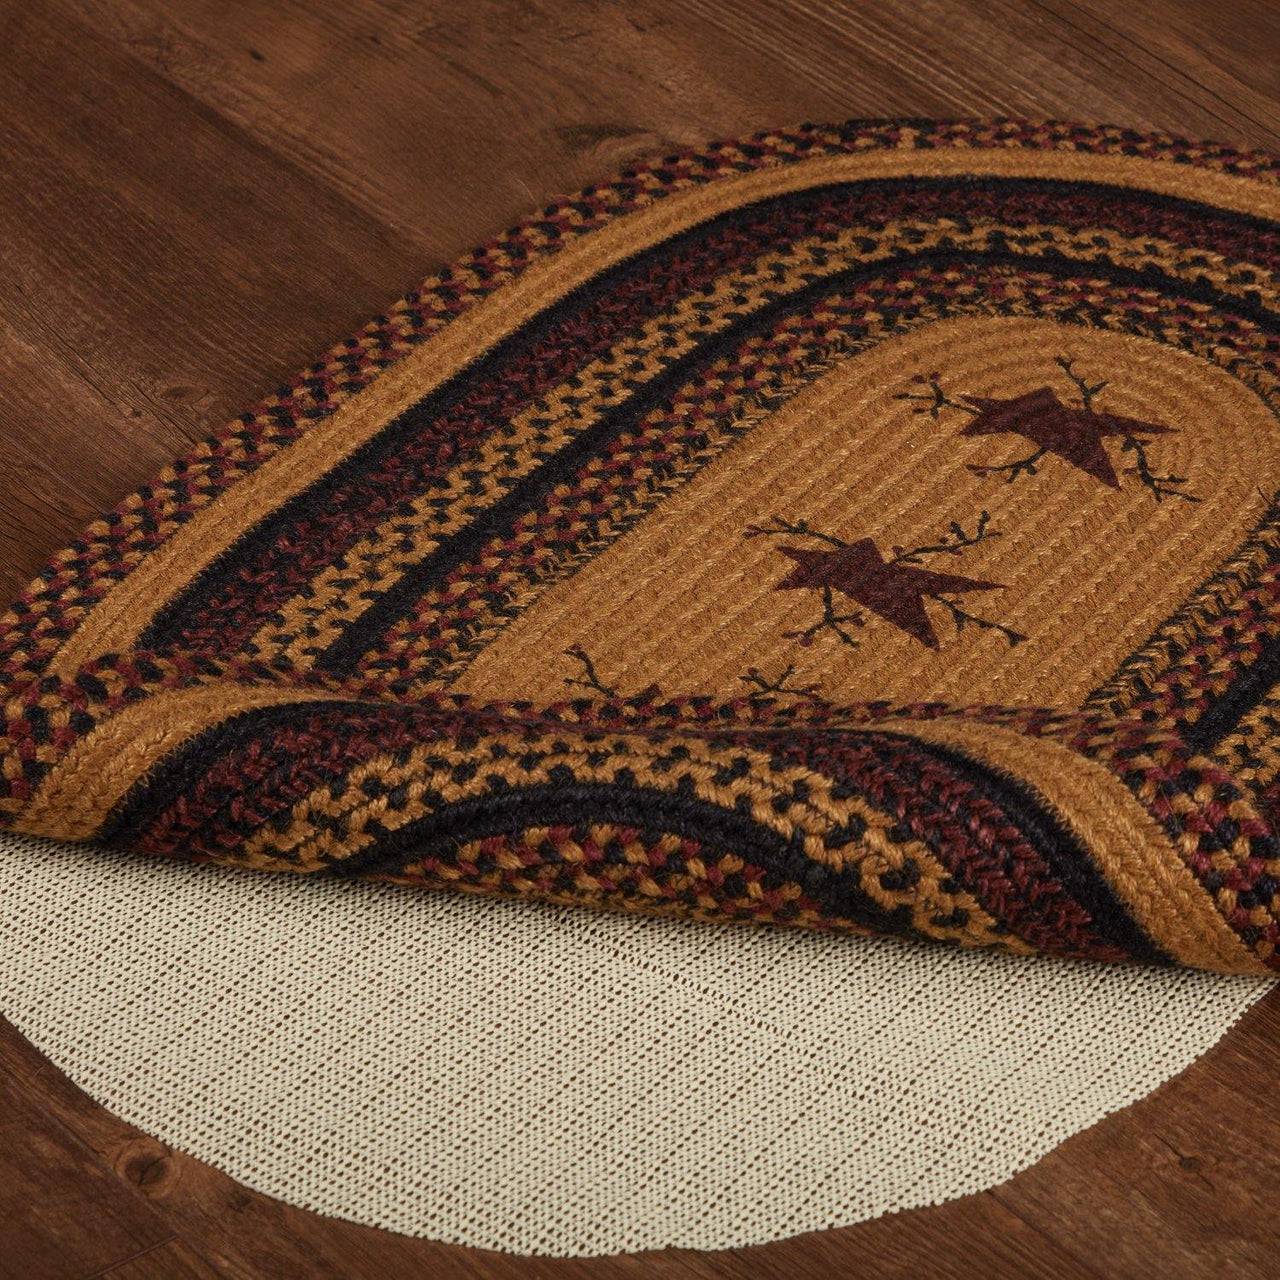 Heritage Farms Star and Pip Jute Braided Rug Oval 20"x30" with Rug Pad VHC Brands - The Fox Decor